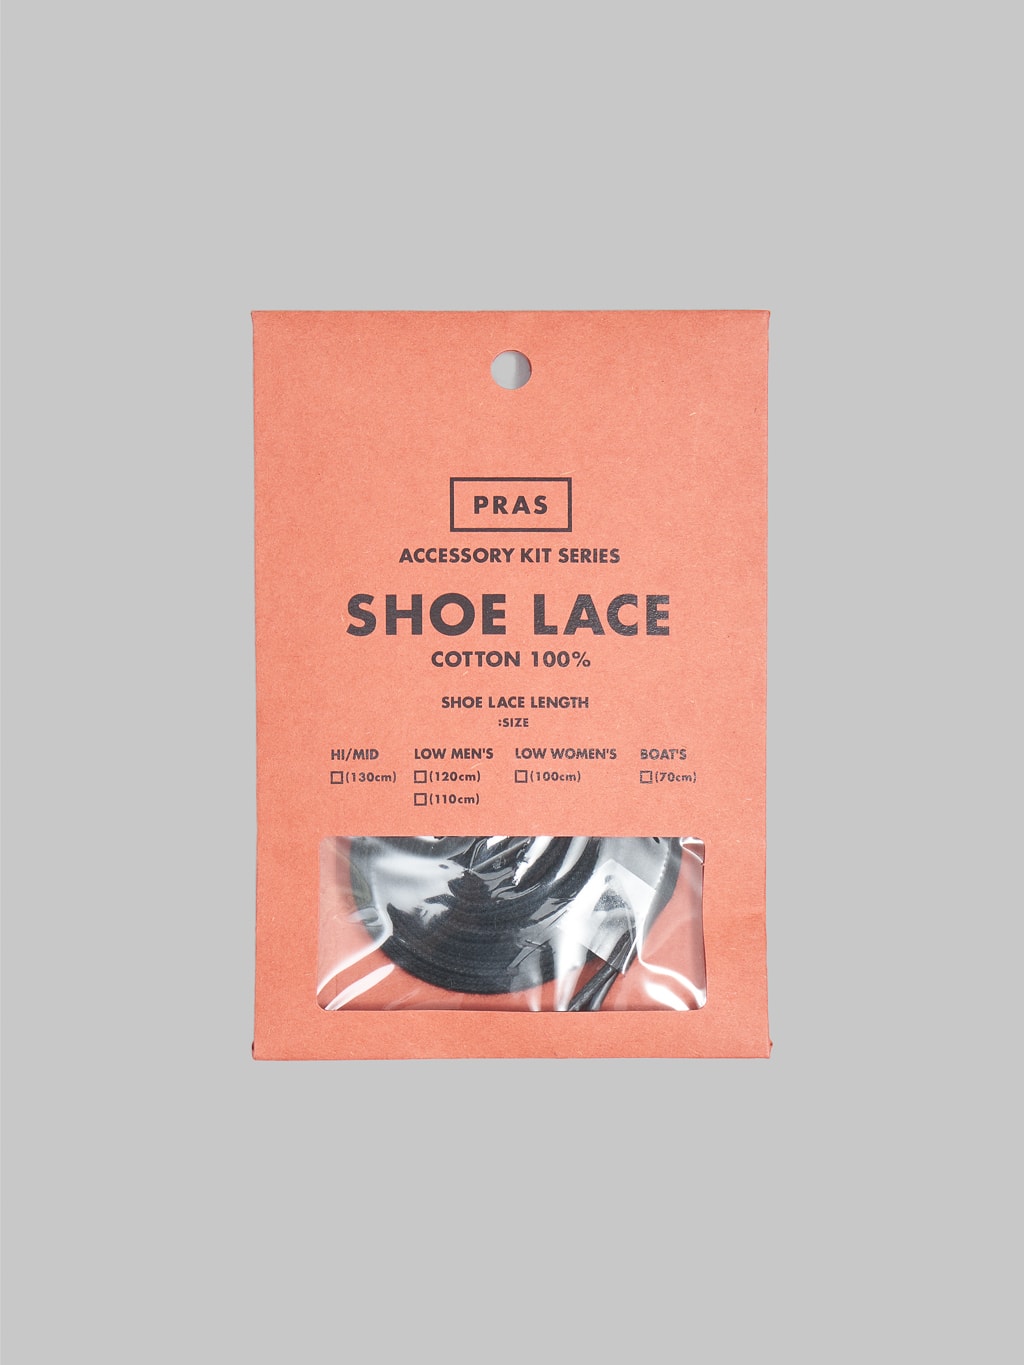 pras shoe lace black packaging front view